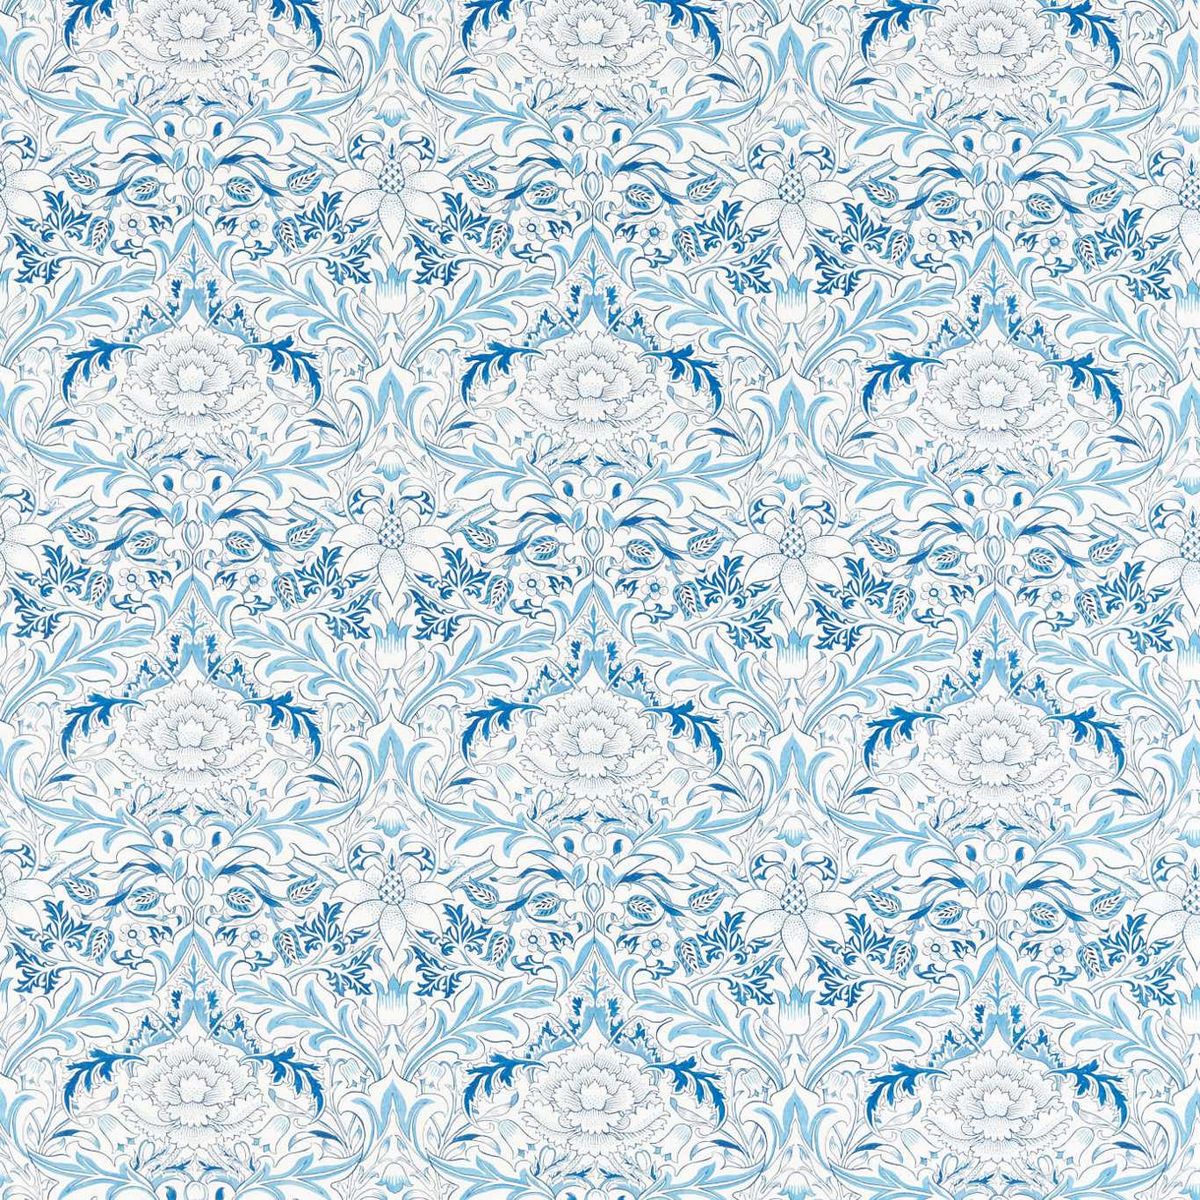 Simply Severn Woad Fabric by William Morris & Co.